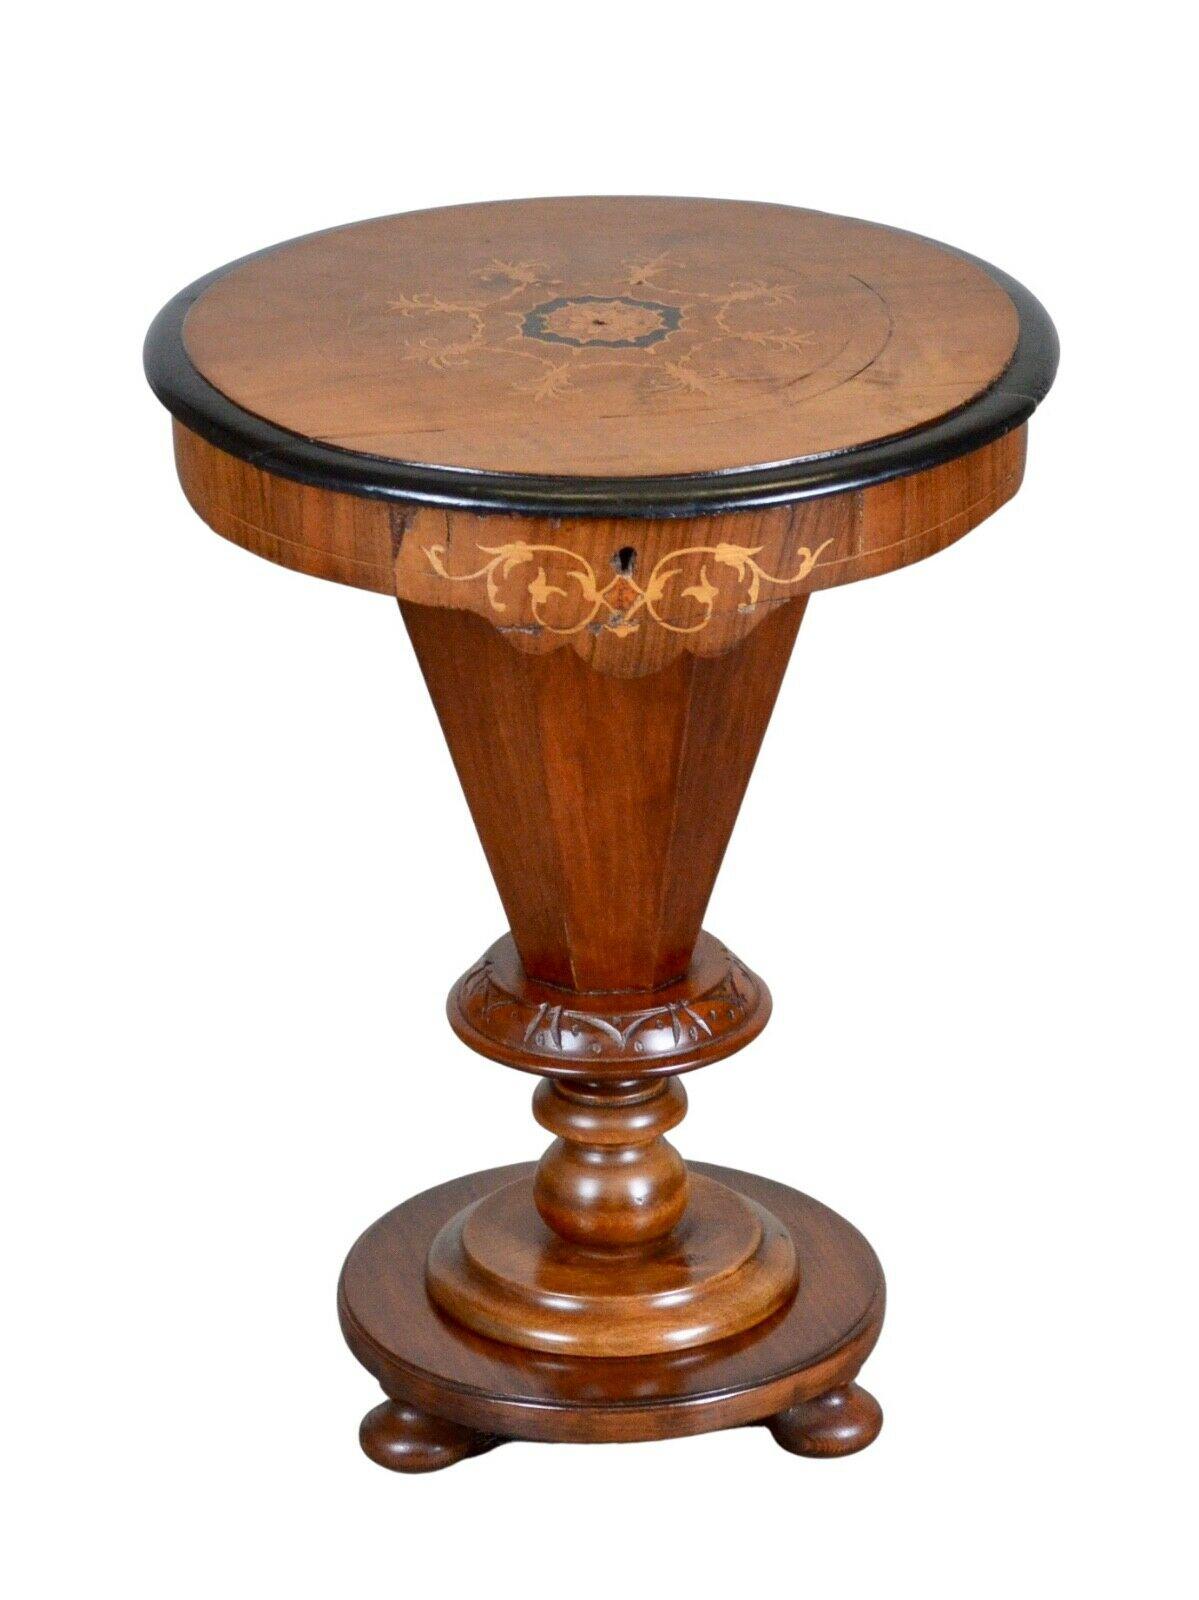 We are delighted to offer for sale this Victorian walnut trumpet circular sewing table. It is ideal for the craft-type person and can be used as a side lamp table.

The table has an inlaid top with ebonised banding to the edge, a trumped base, and